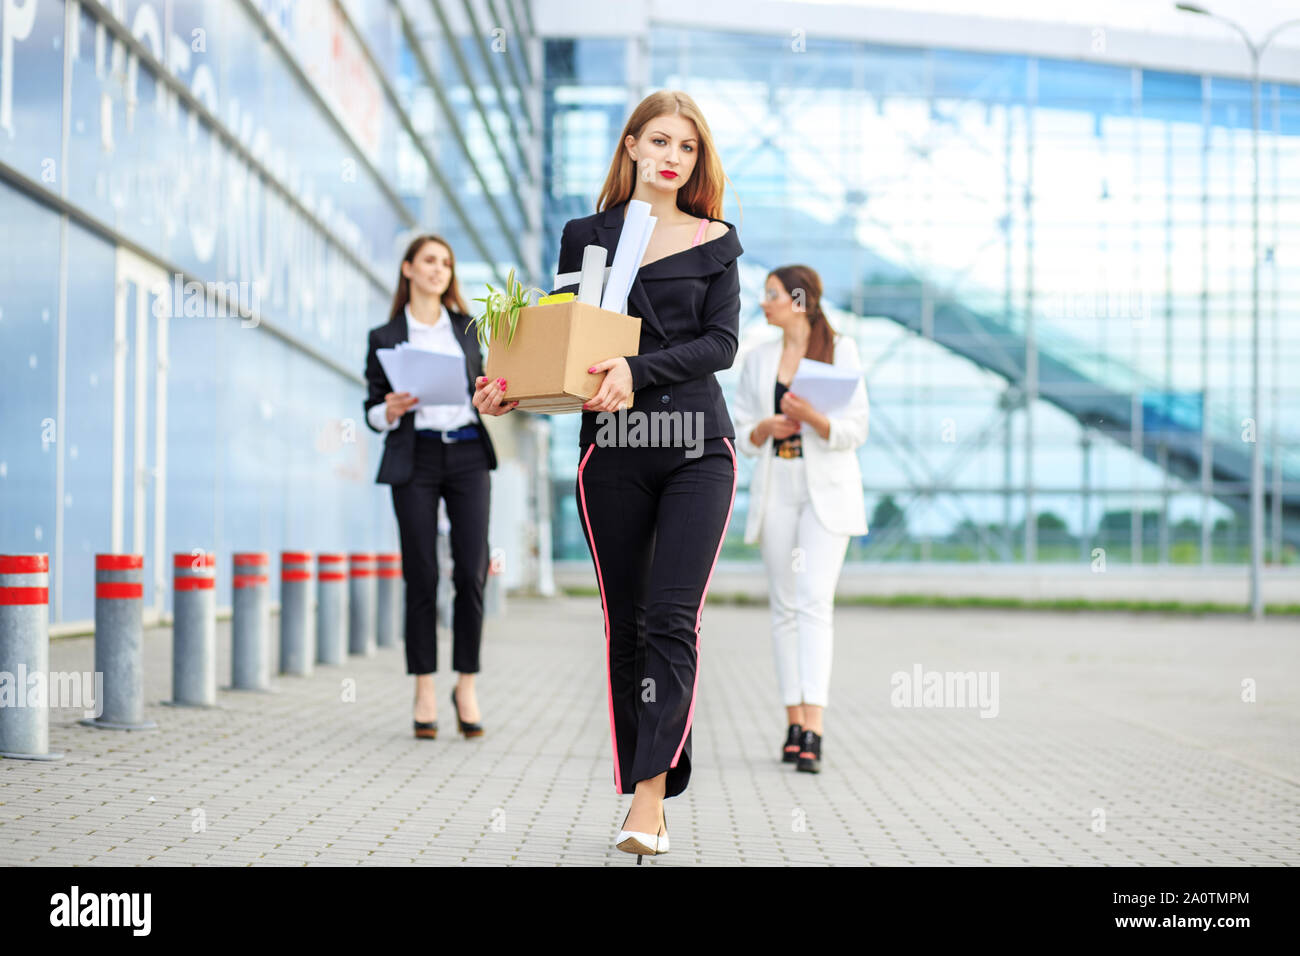 Sad woman fired from a large corporation. The end of a career. Concept for business, unemployment, labor exchange and dismissal. Stock Photo